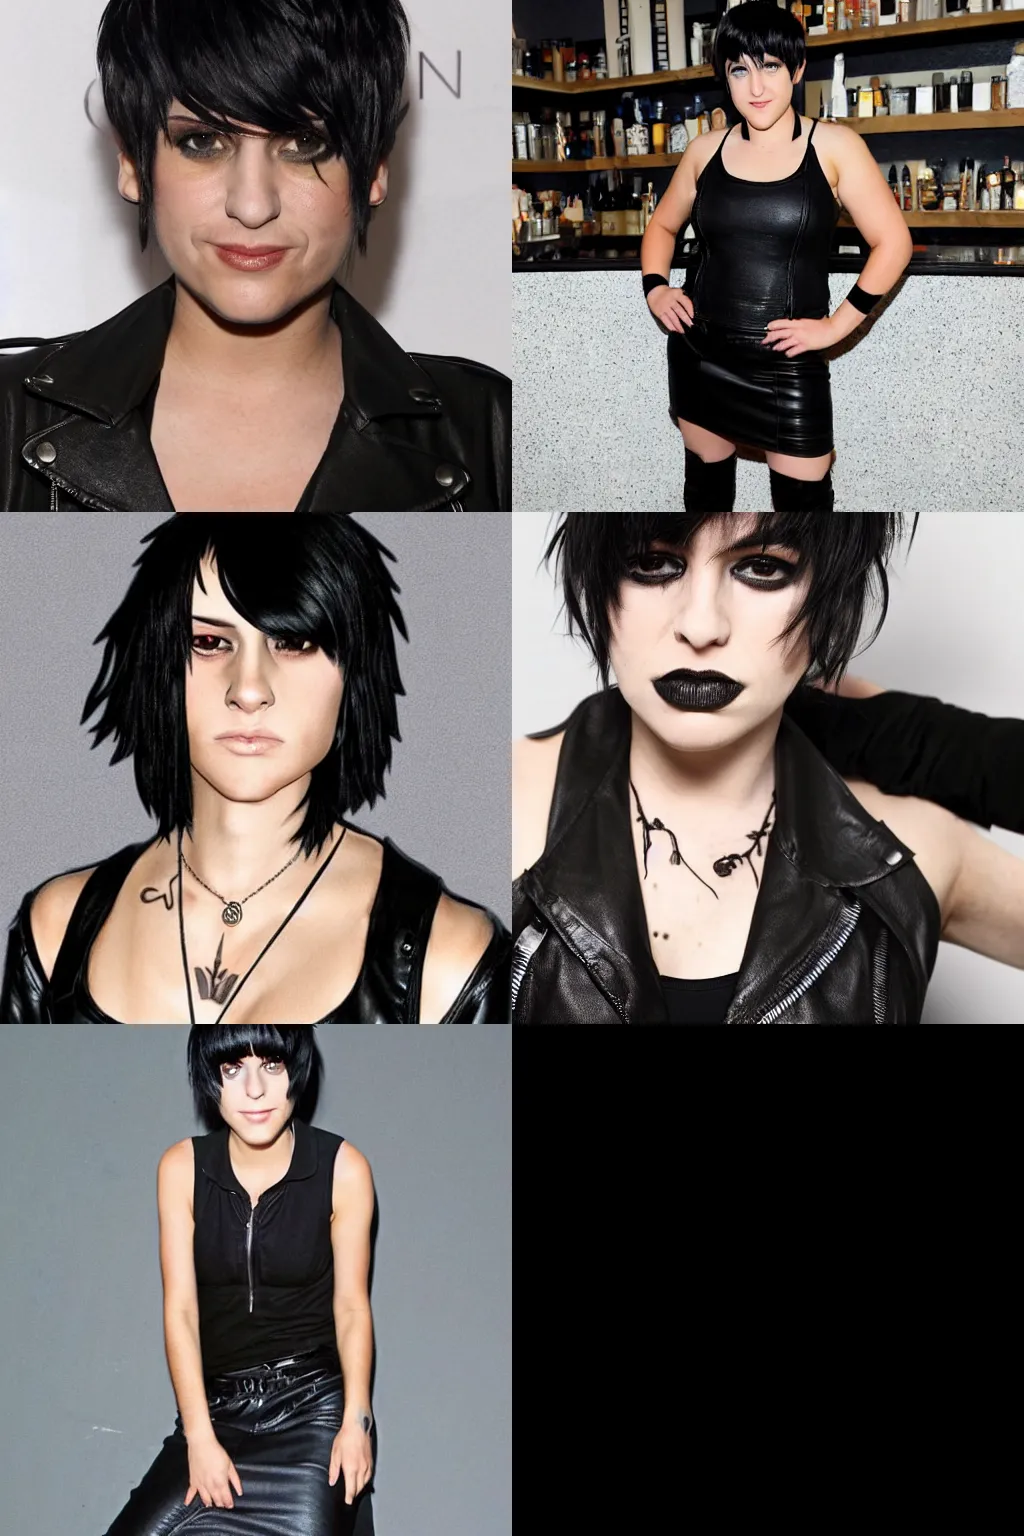 Prompt: an emo by arthur adams. her hair is dark brown and cut into a short, messy pixie cut. she has a slightly rounded face, with a pointed chin, large entirely - black eyes, and a small nose. she is wearing a black tank top, a black leather jacket, a black knee - length skirt, a black choker, and black leather boots.